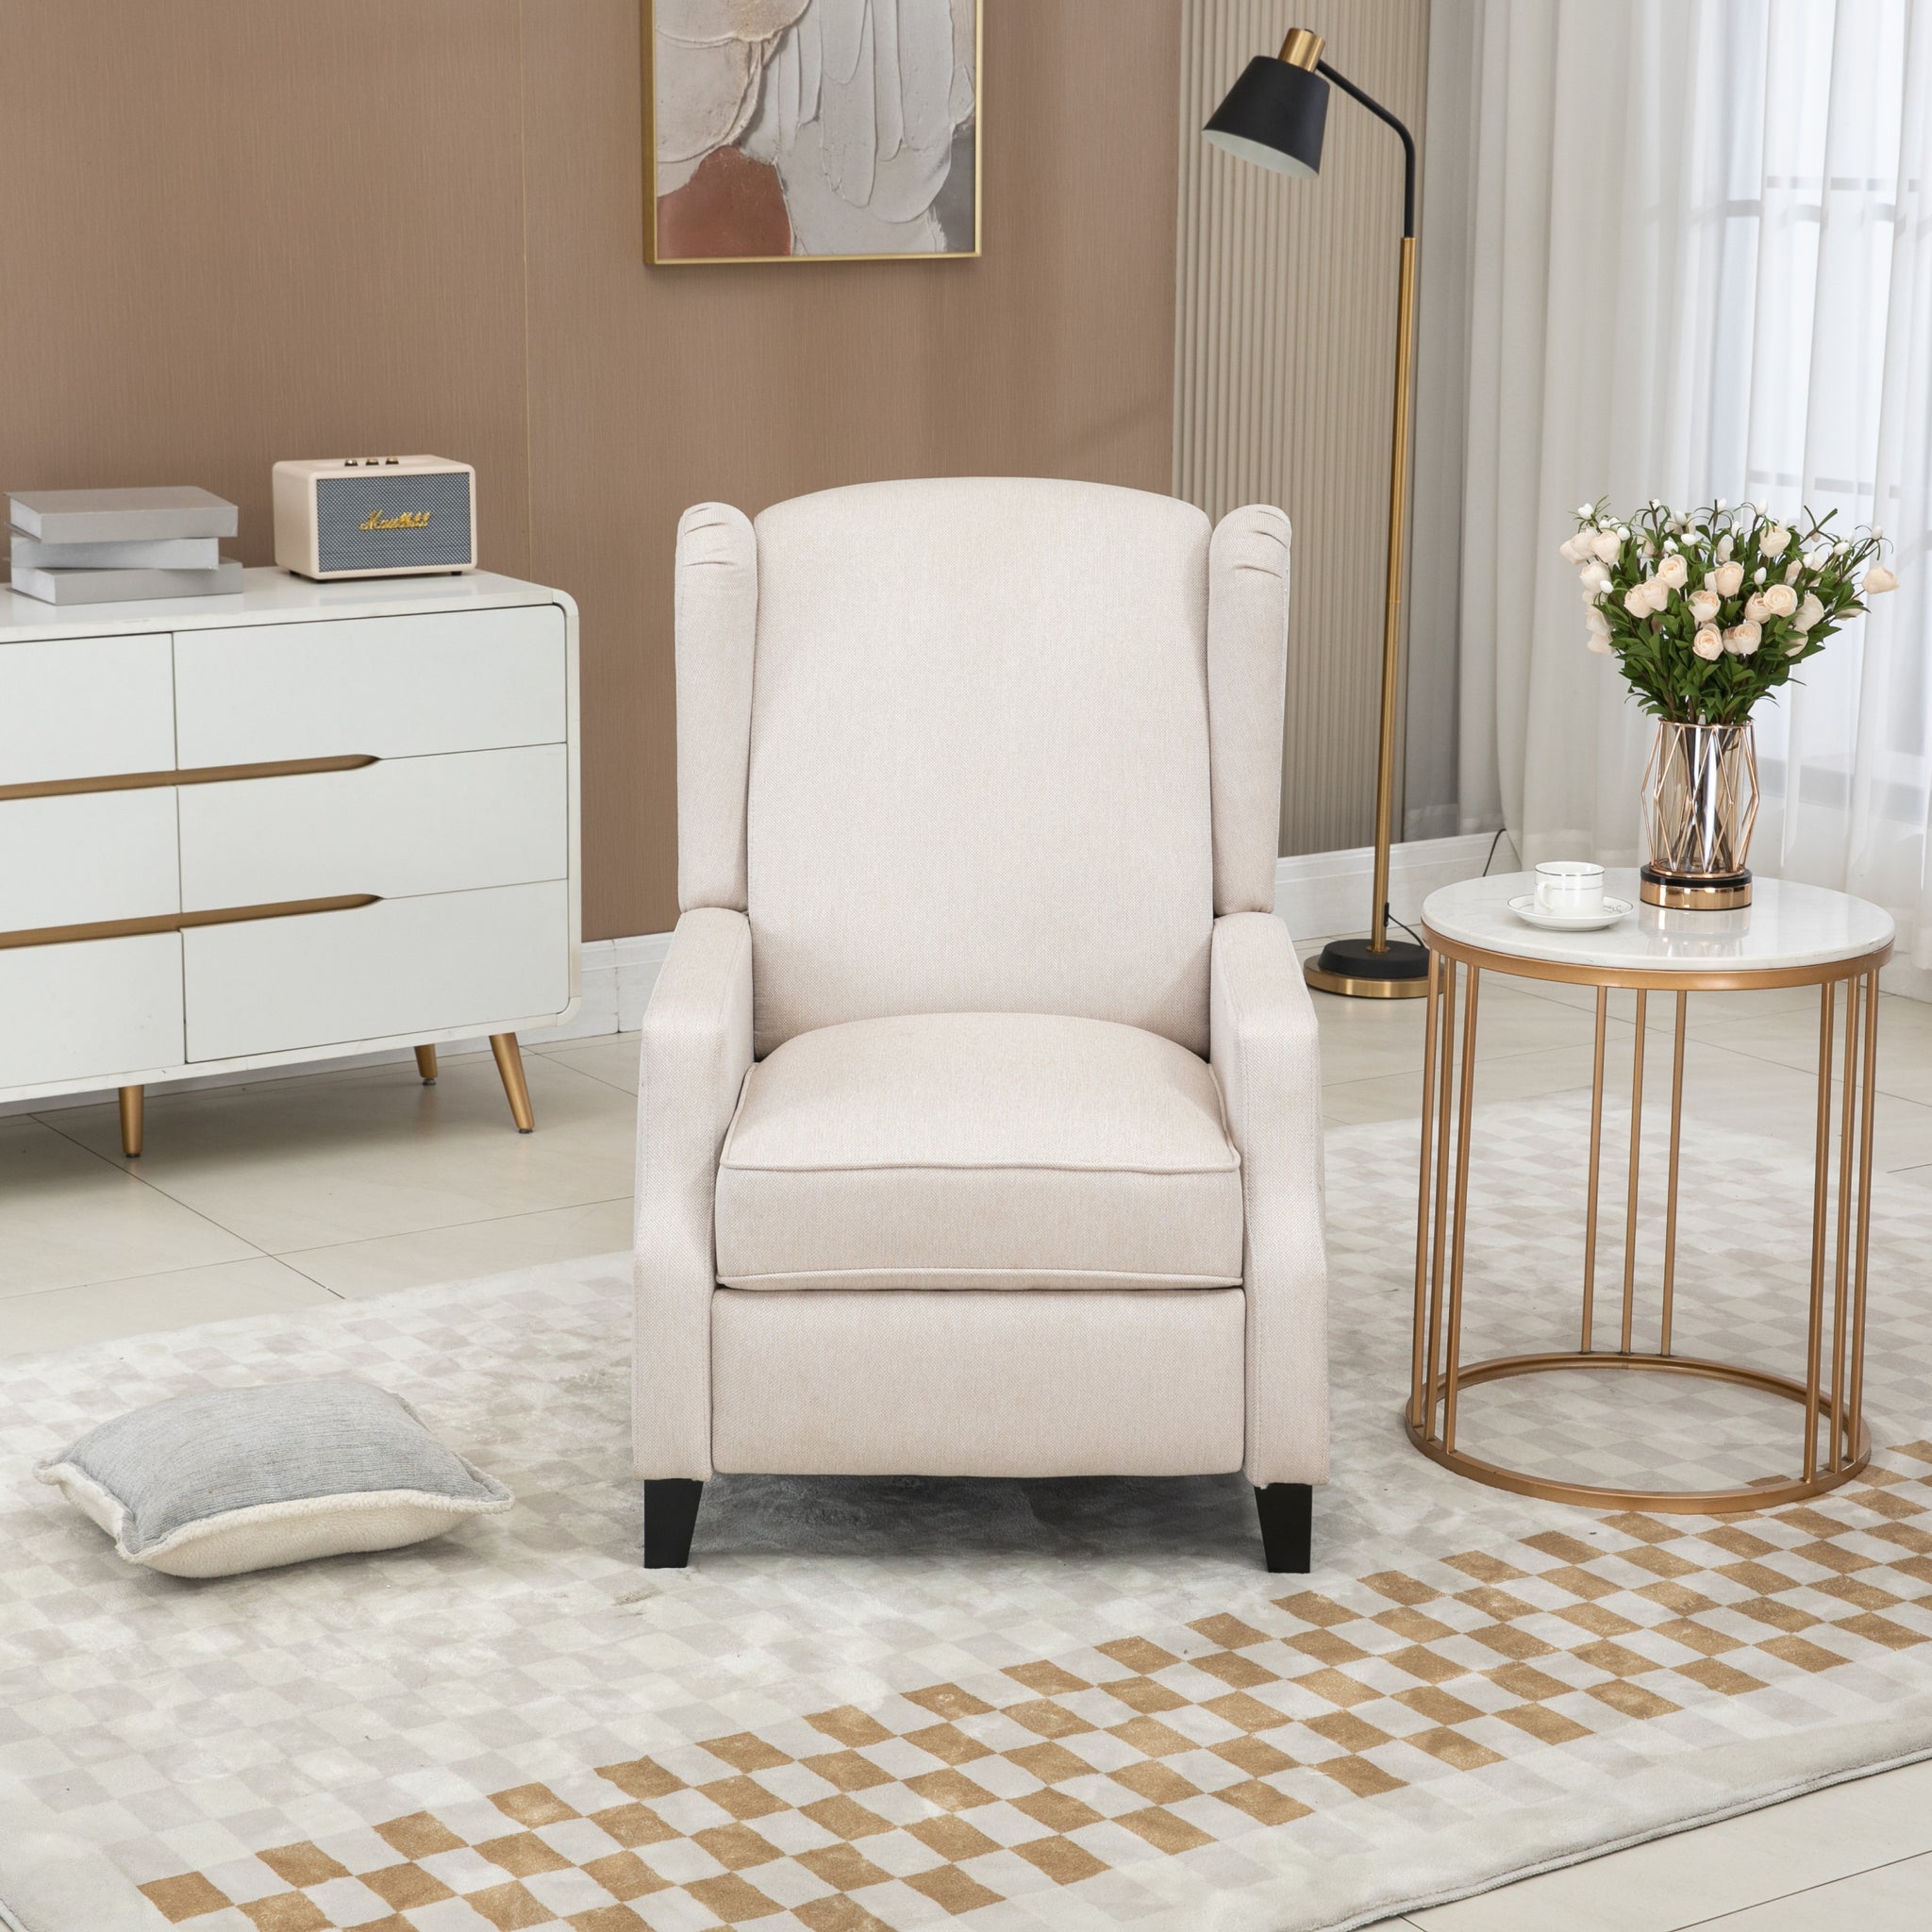 COOLMORE Modern Comfortable Upholstered leisure chair beige-linen